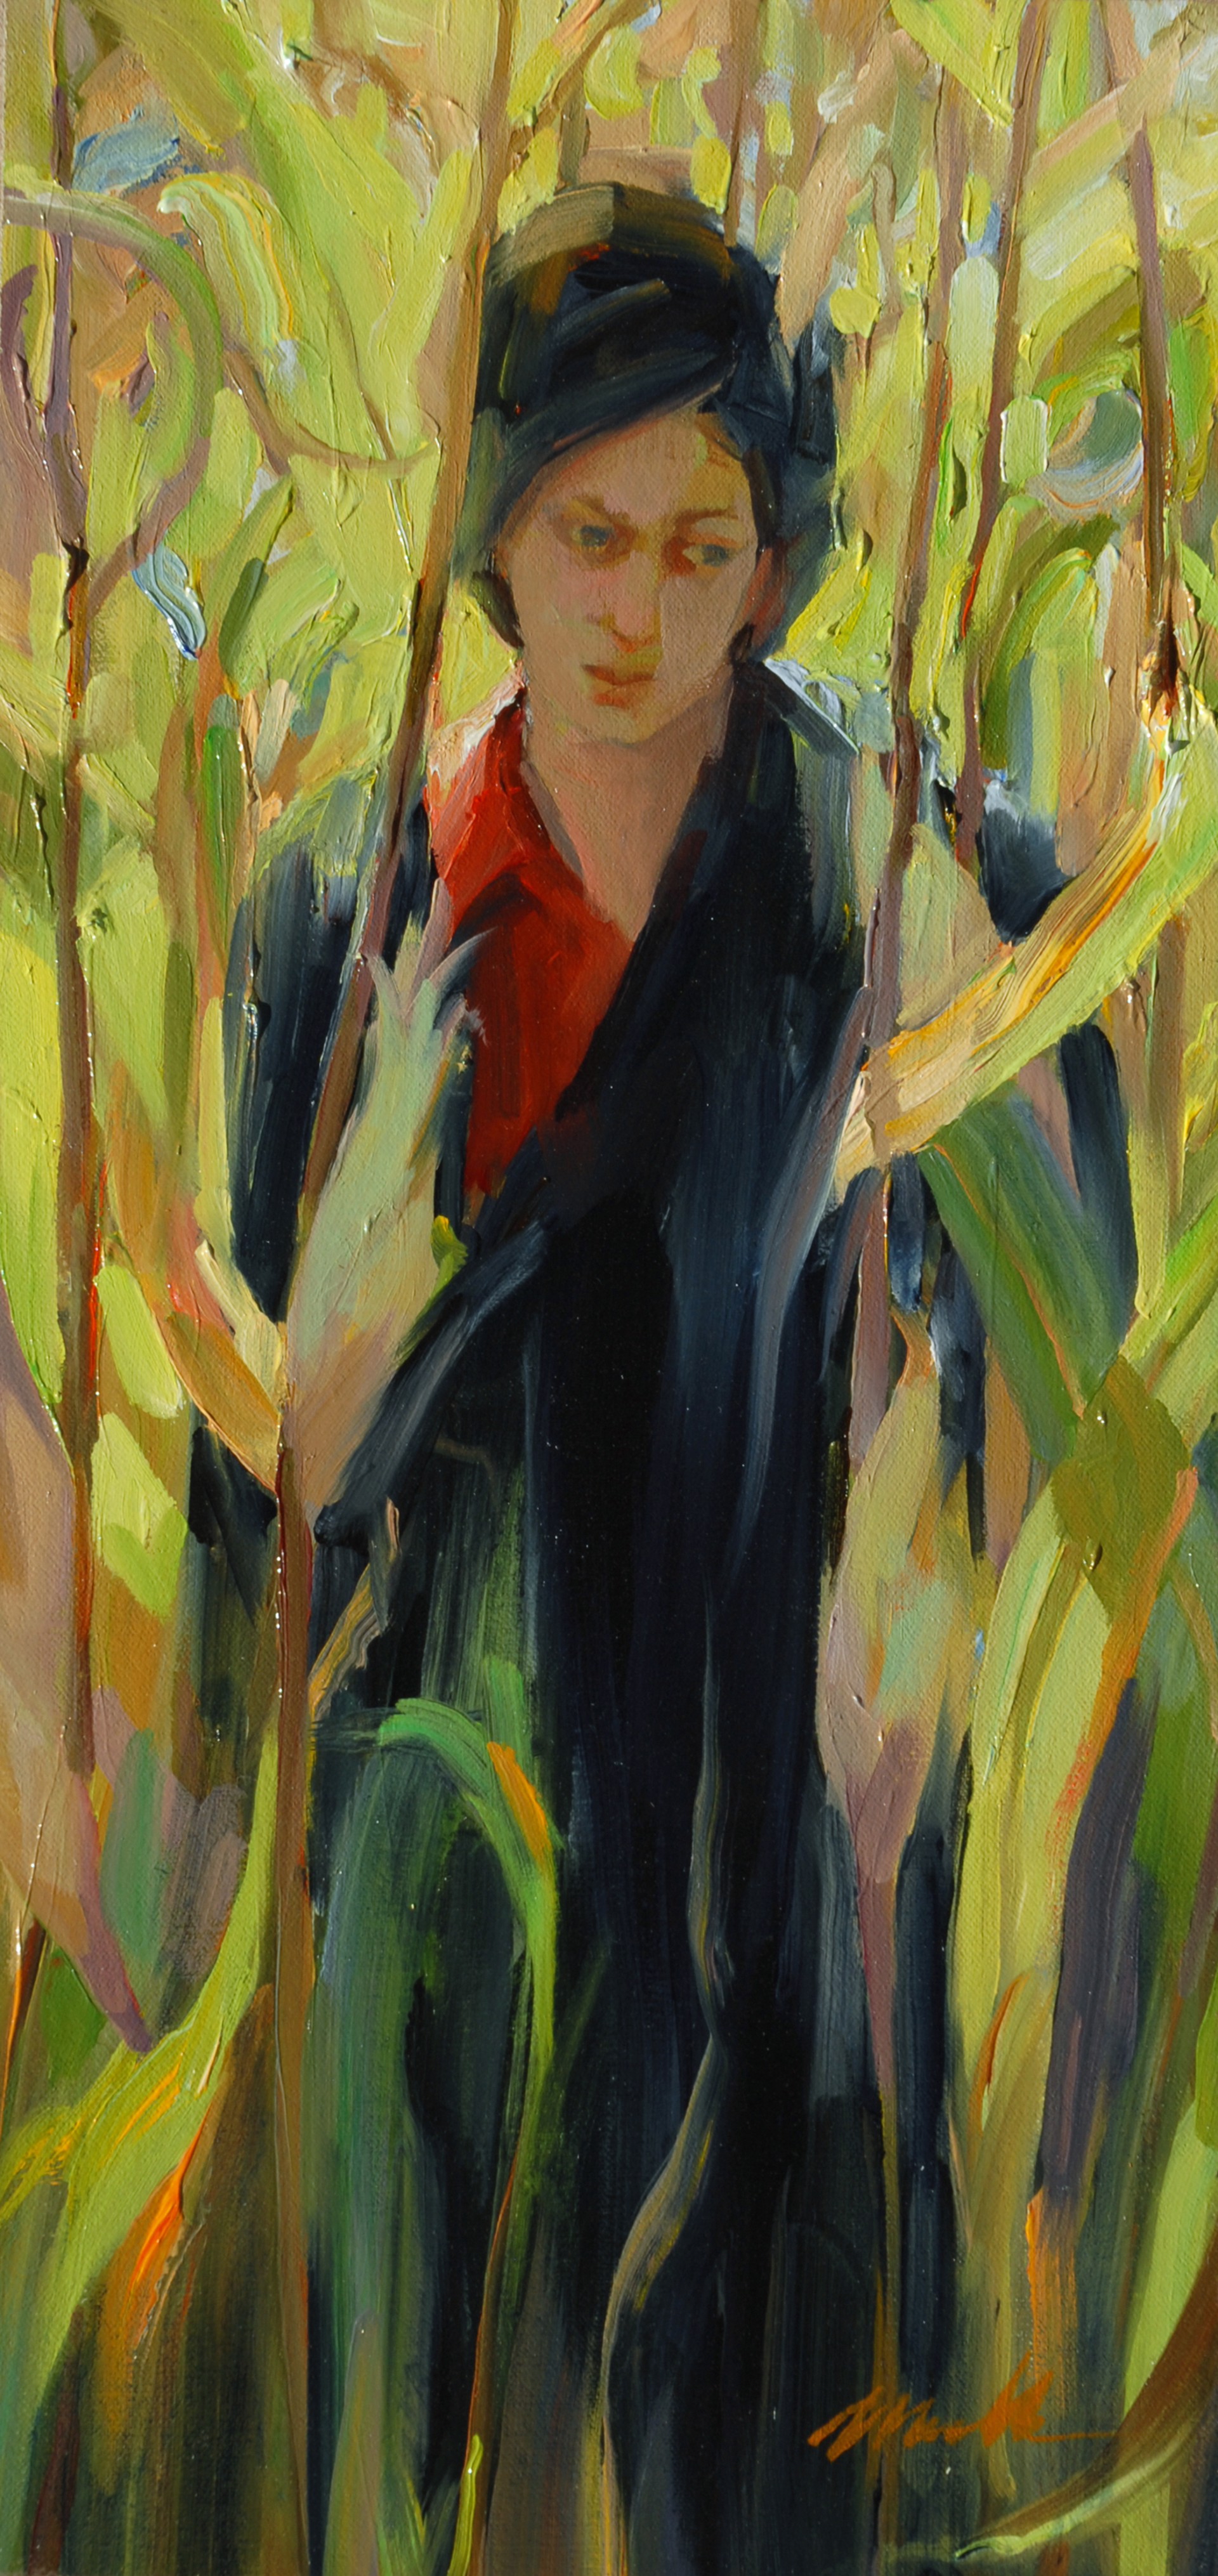 Conversations with Corn by Michelle Torrez